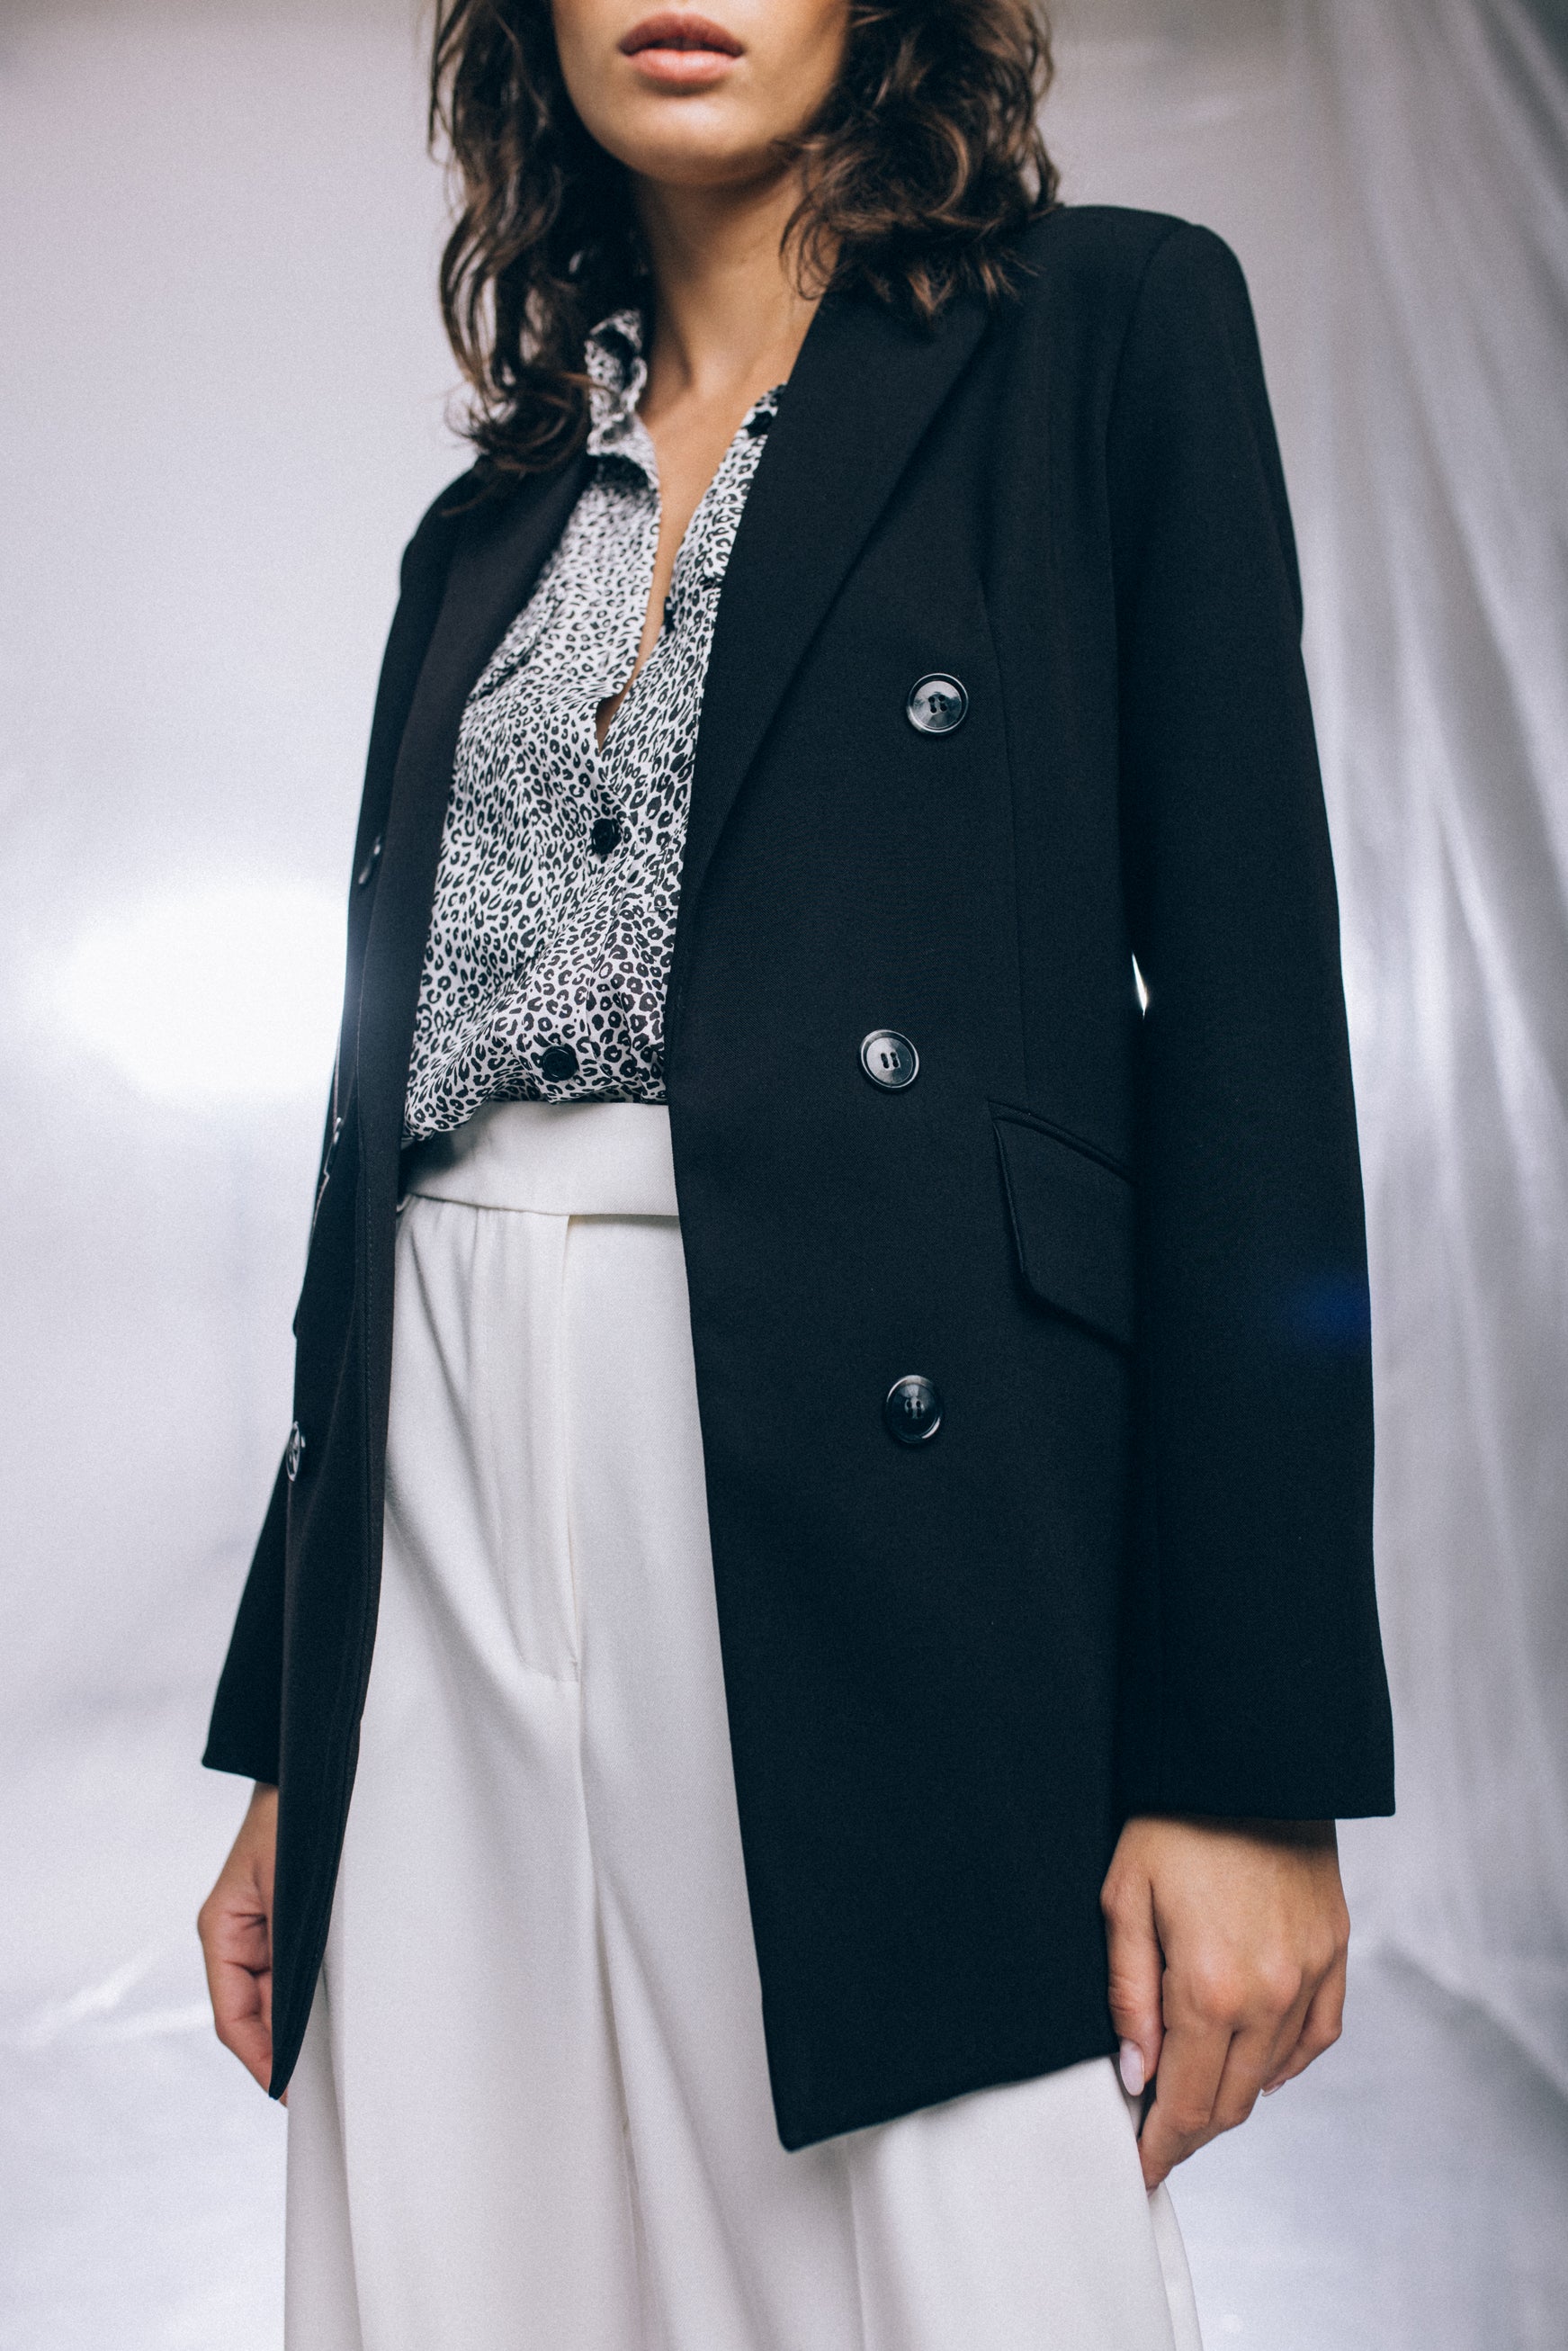 Open blazer with buttons